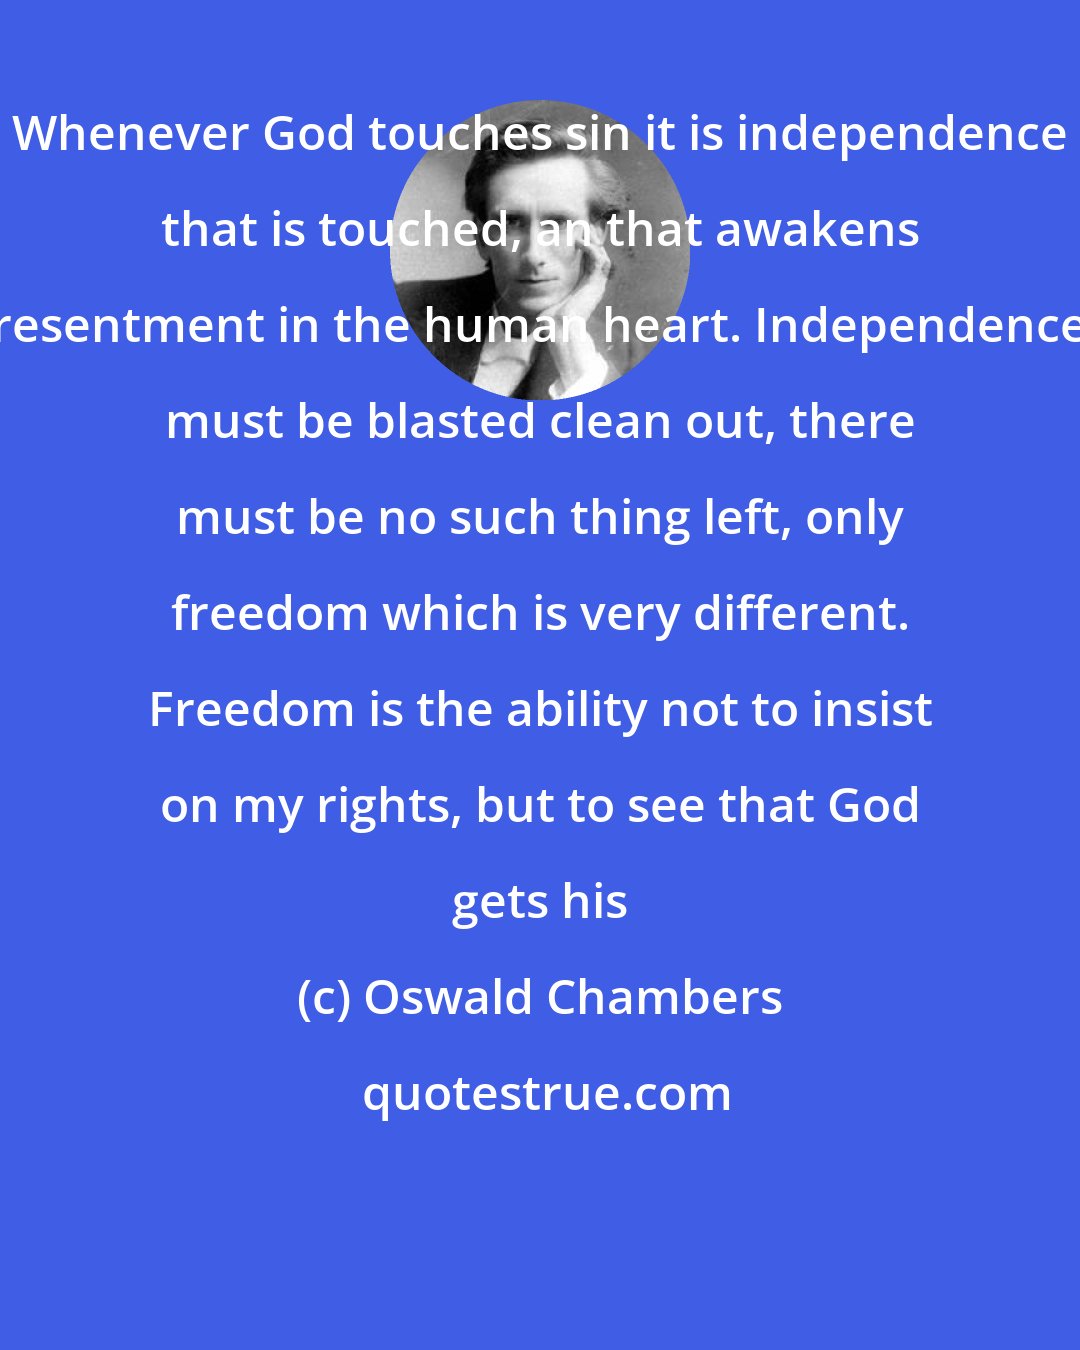 Oswald Chambers: Whenever God touches sin it is independence that is touched, an that awakens resentment in the human heart. Independence must be blasted clean out, there must be no such thing left, only freedom which is very different. Freedom is the ability not to insist on my rights, but to see that God gets his